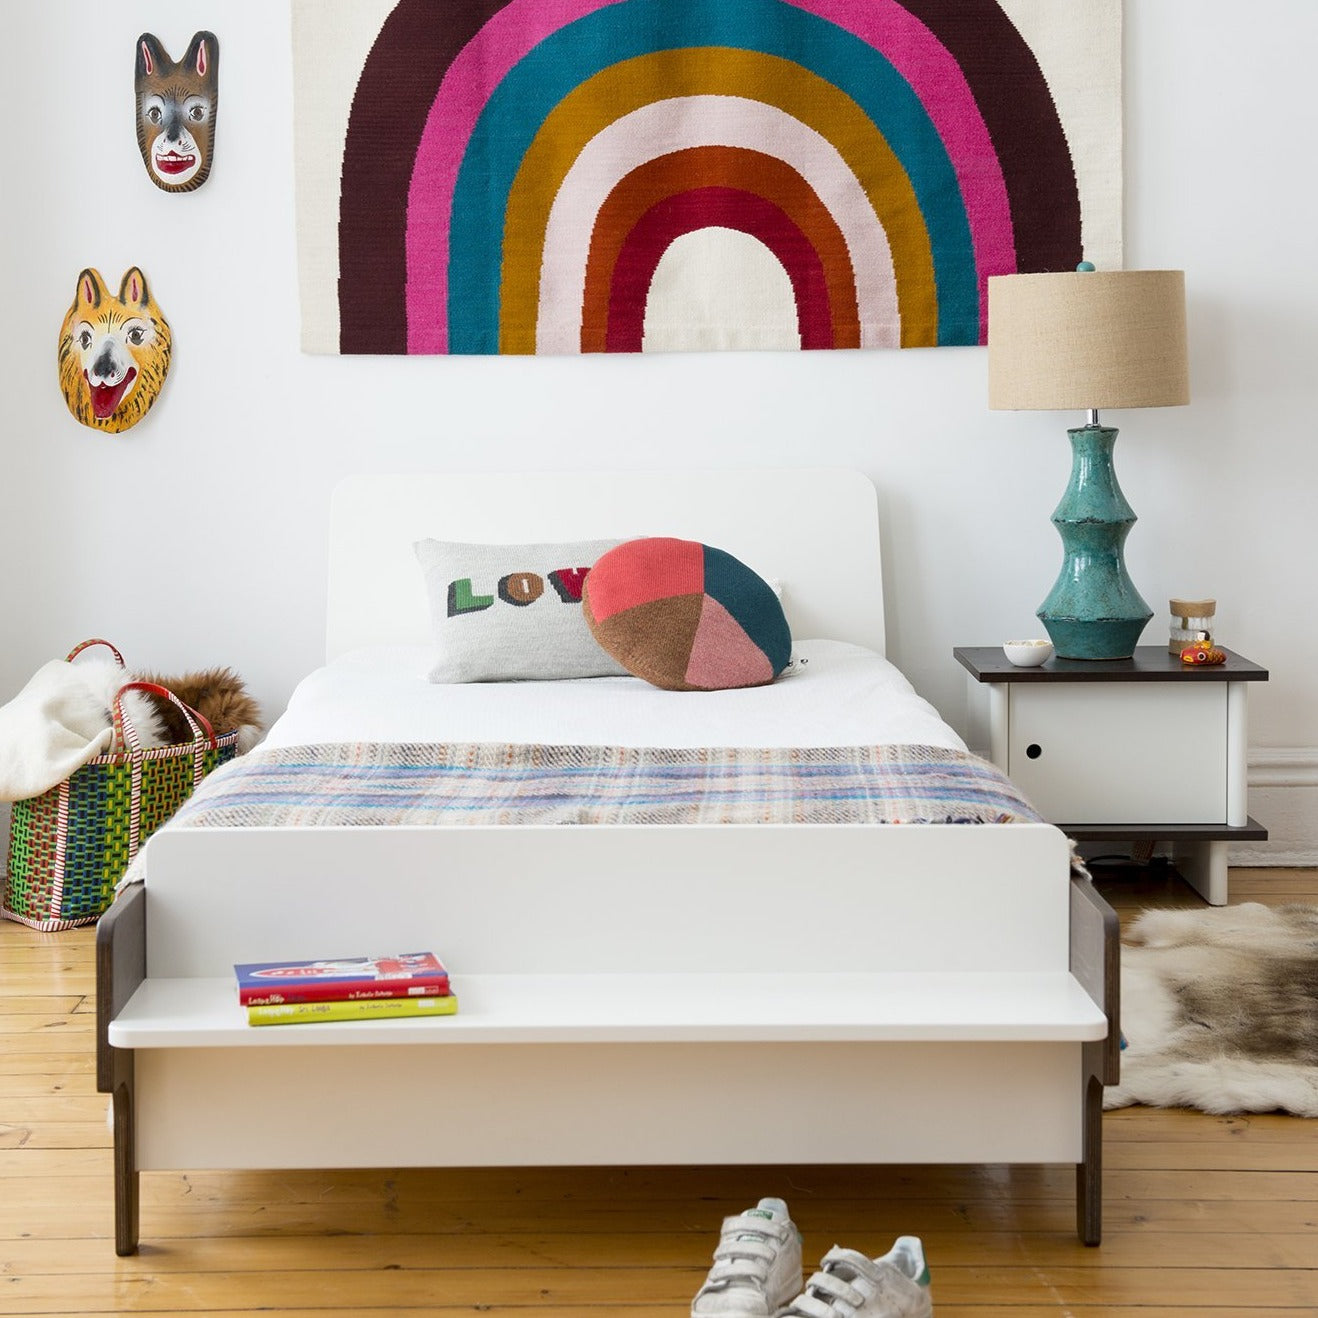 Oeuf NYC River Single Bed - White & Walnut